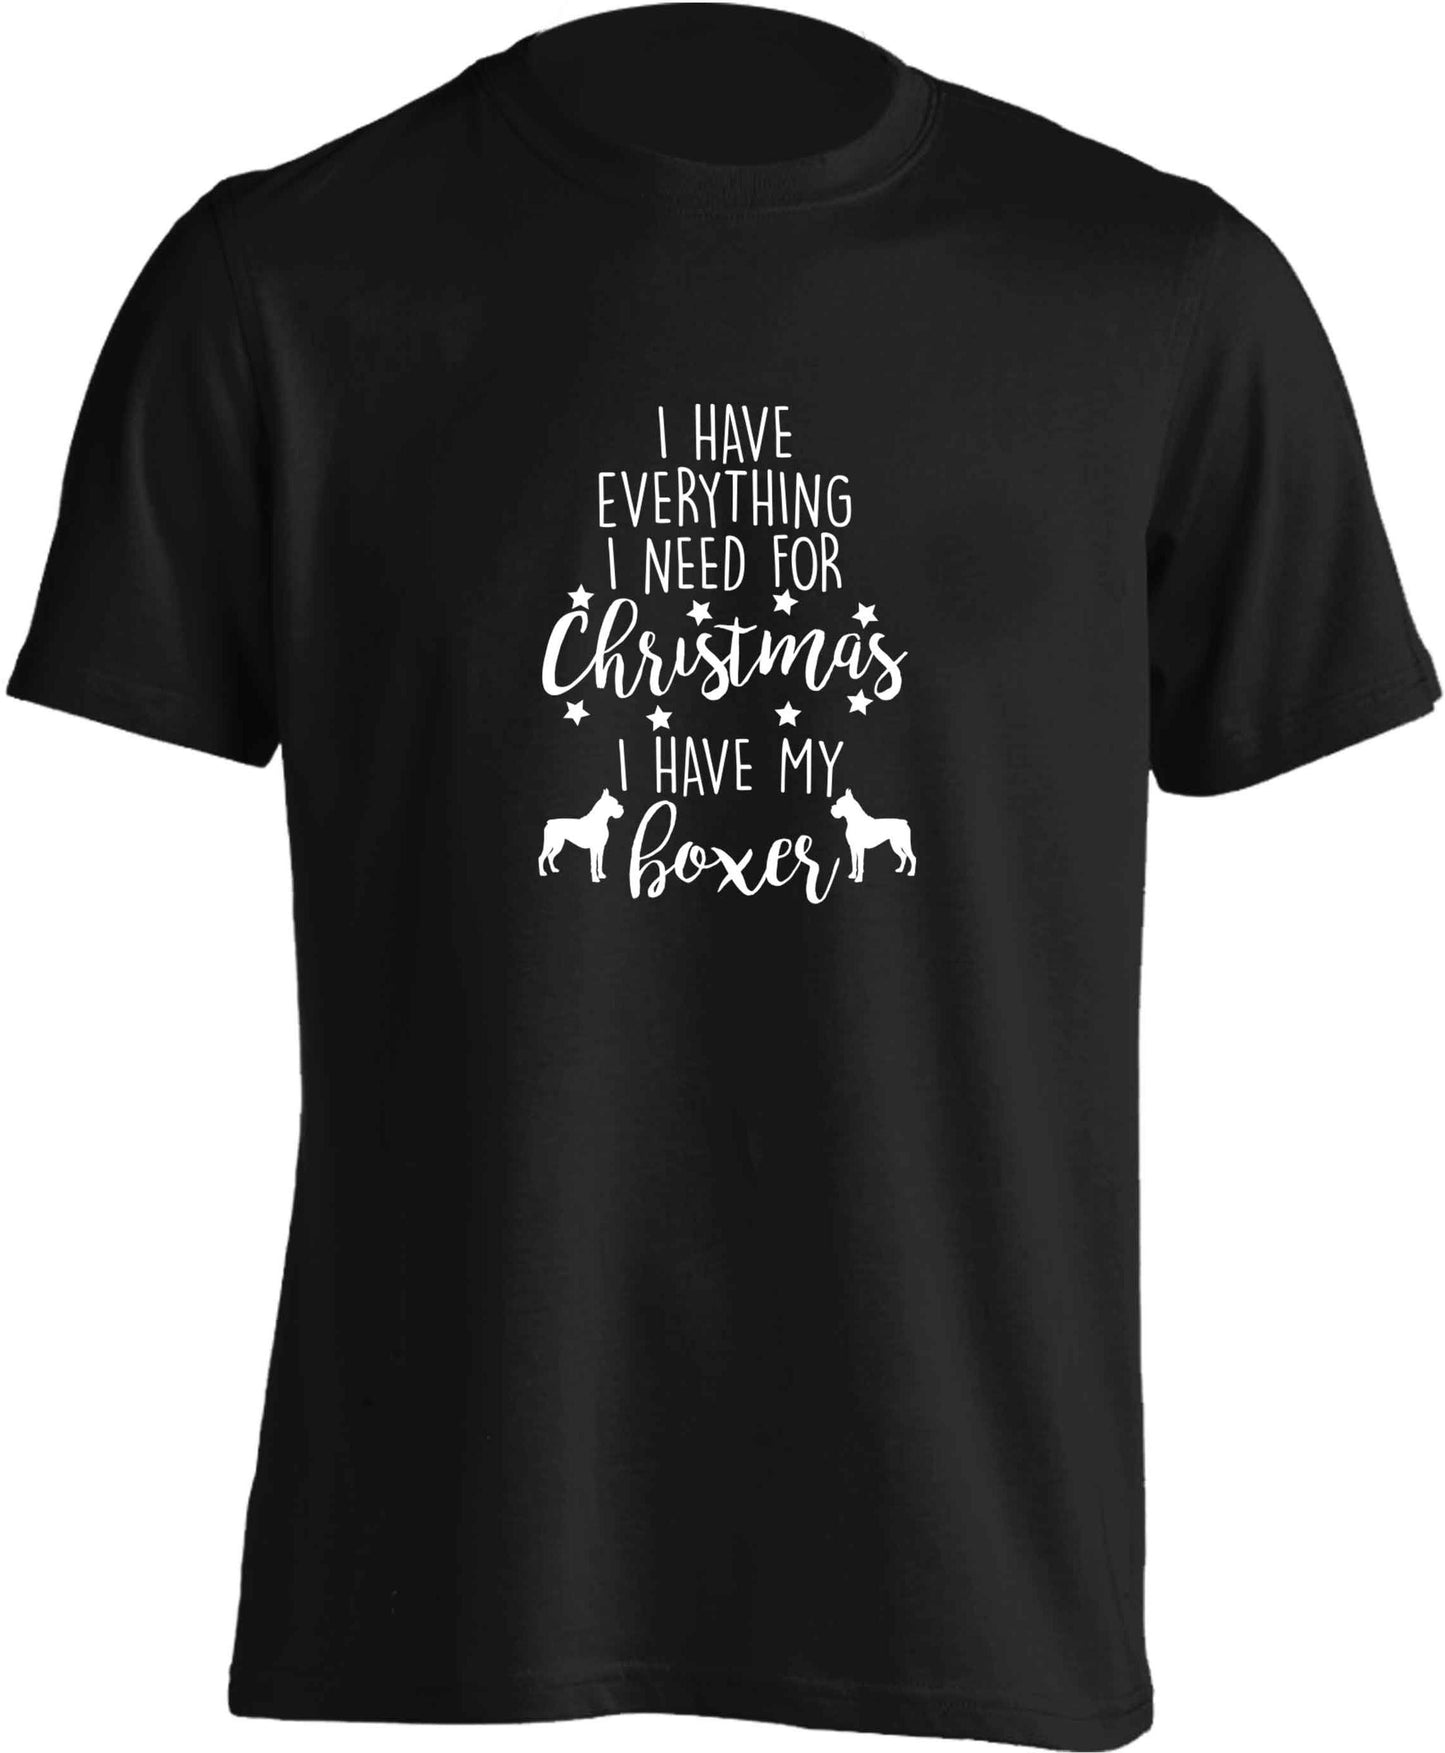 I have everything I need for Christmas I have my boxer adults unisex black Tshirt 2XL